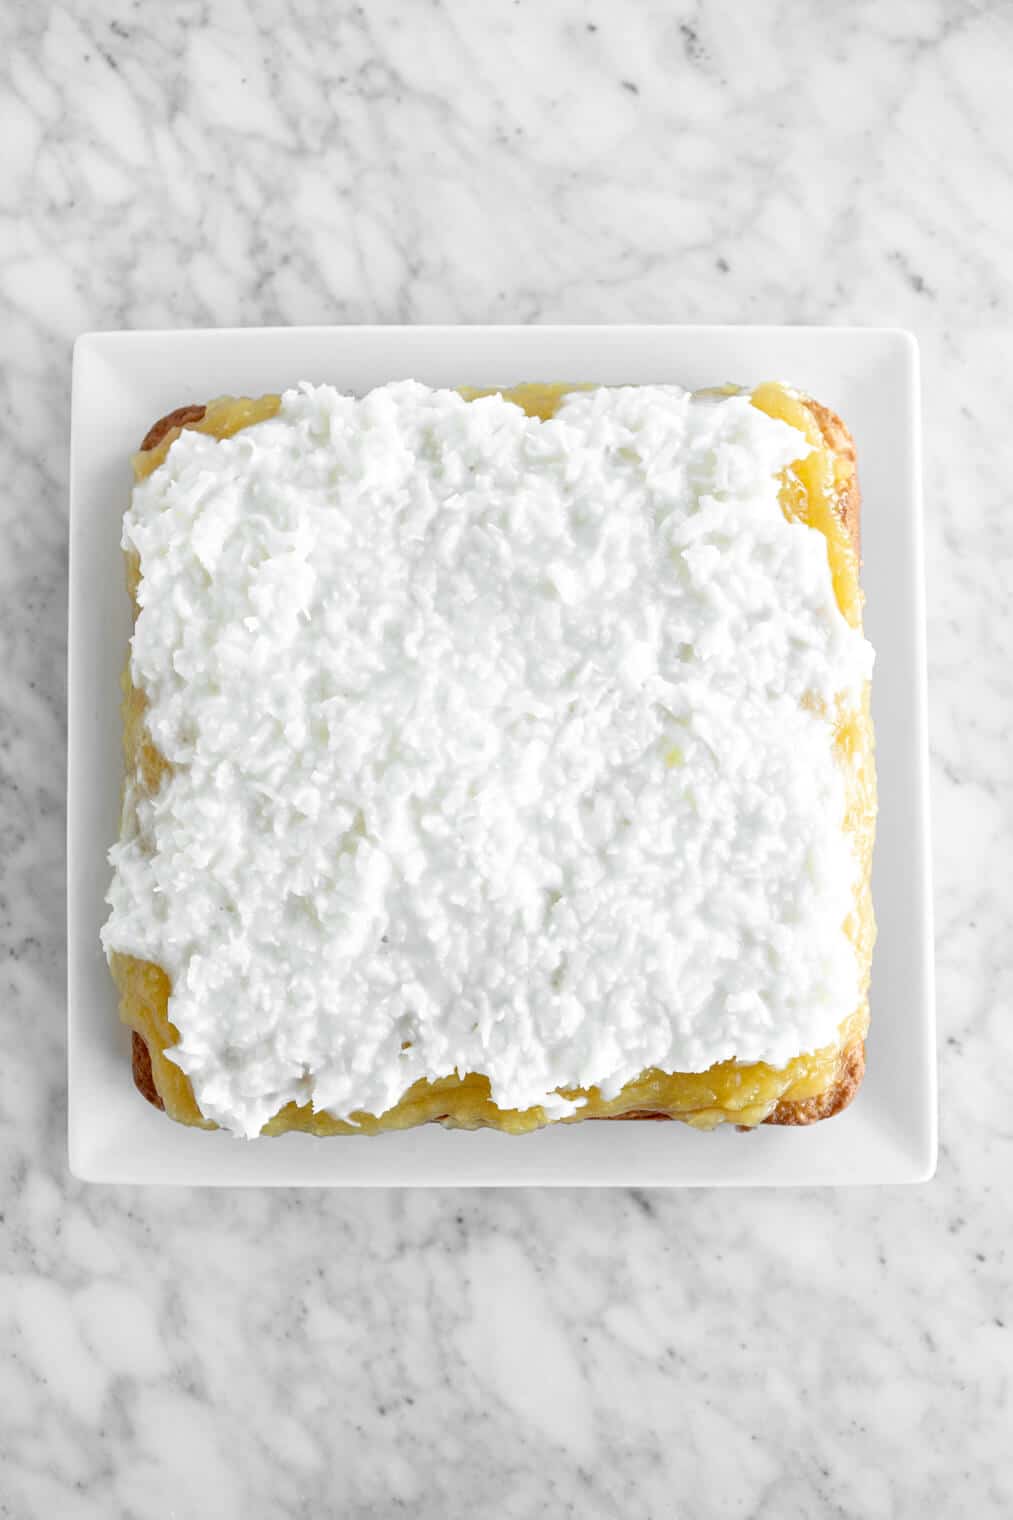 Square cake topped with coconut filling on a white serving plate.